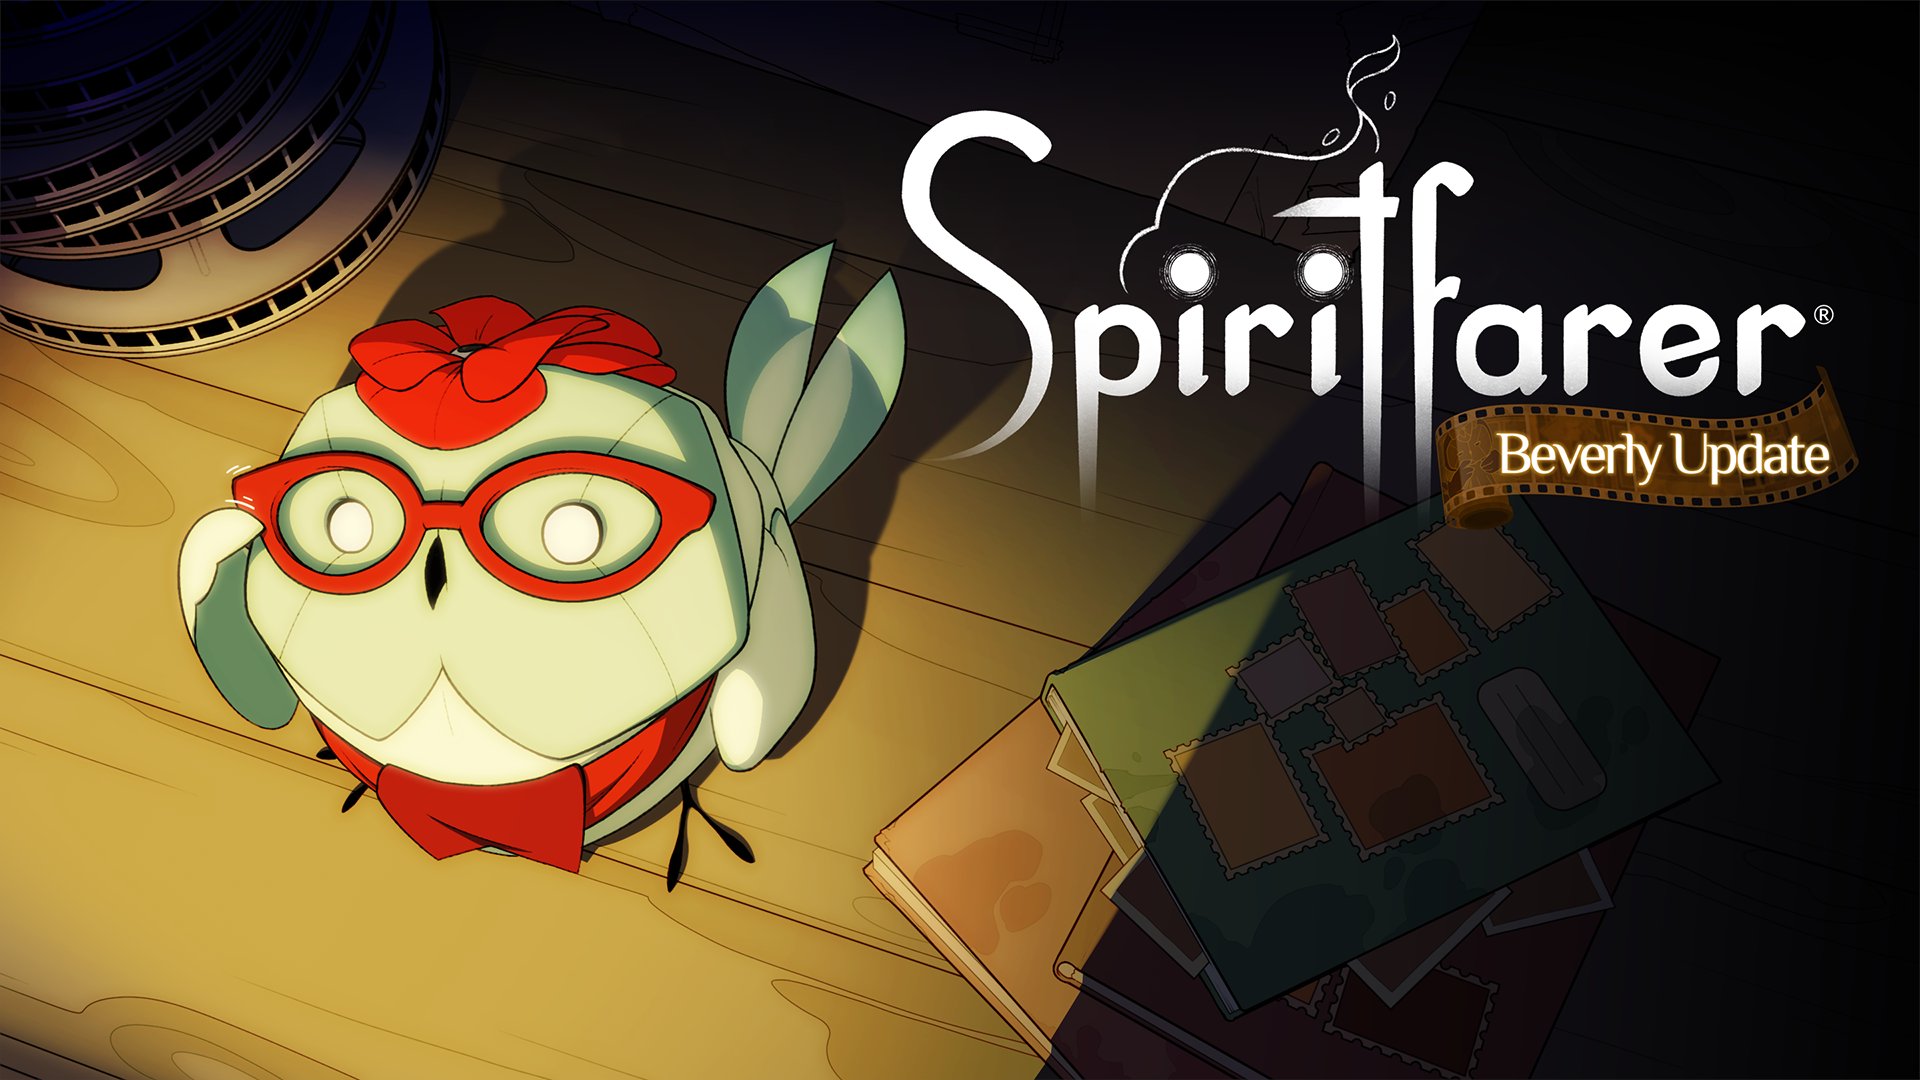 Spiritfarer's Beverly Update now available, iam8bit Collector's Edition launching in 2022